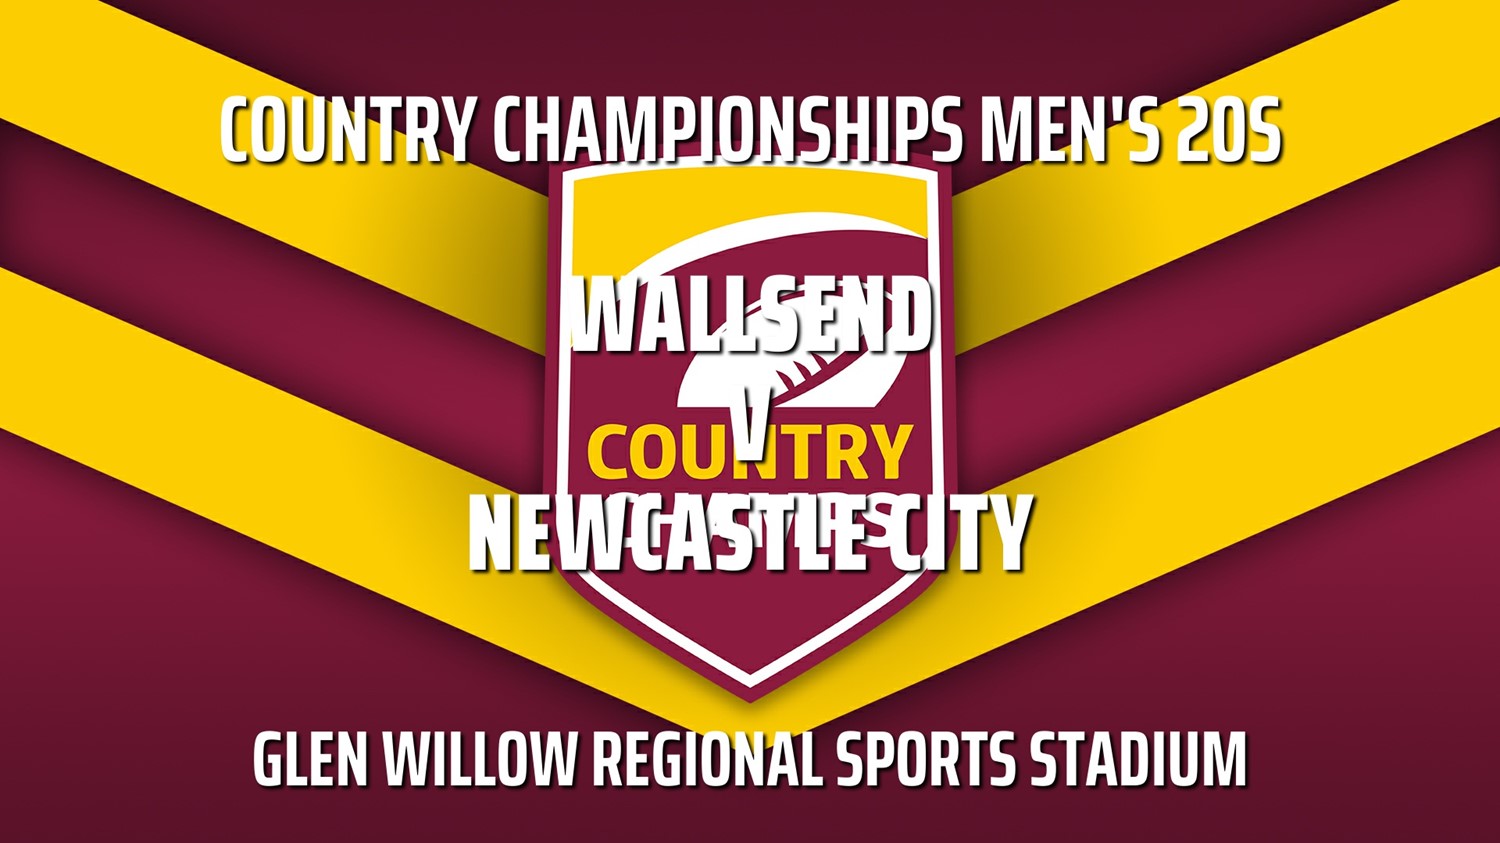 231014-Country Championships Men's 20s - Wallsend Wolves v Newcastle City Touch Minigame Slate Image